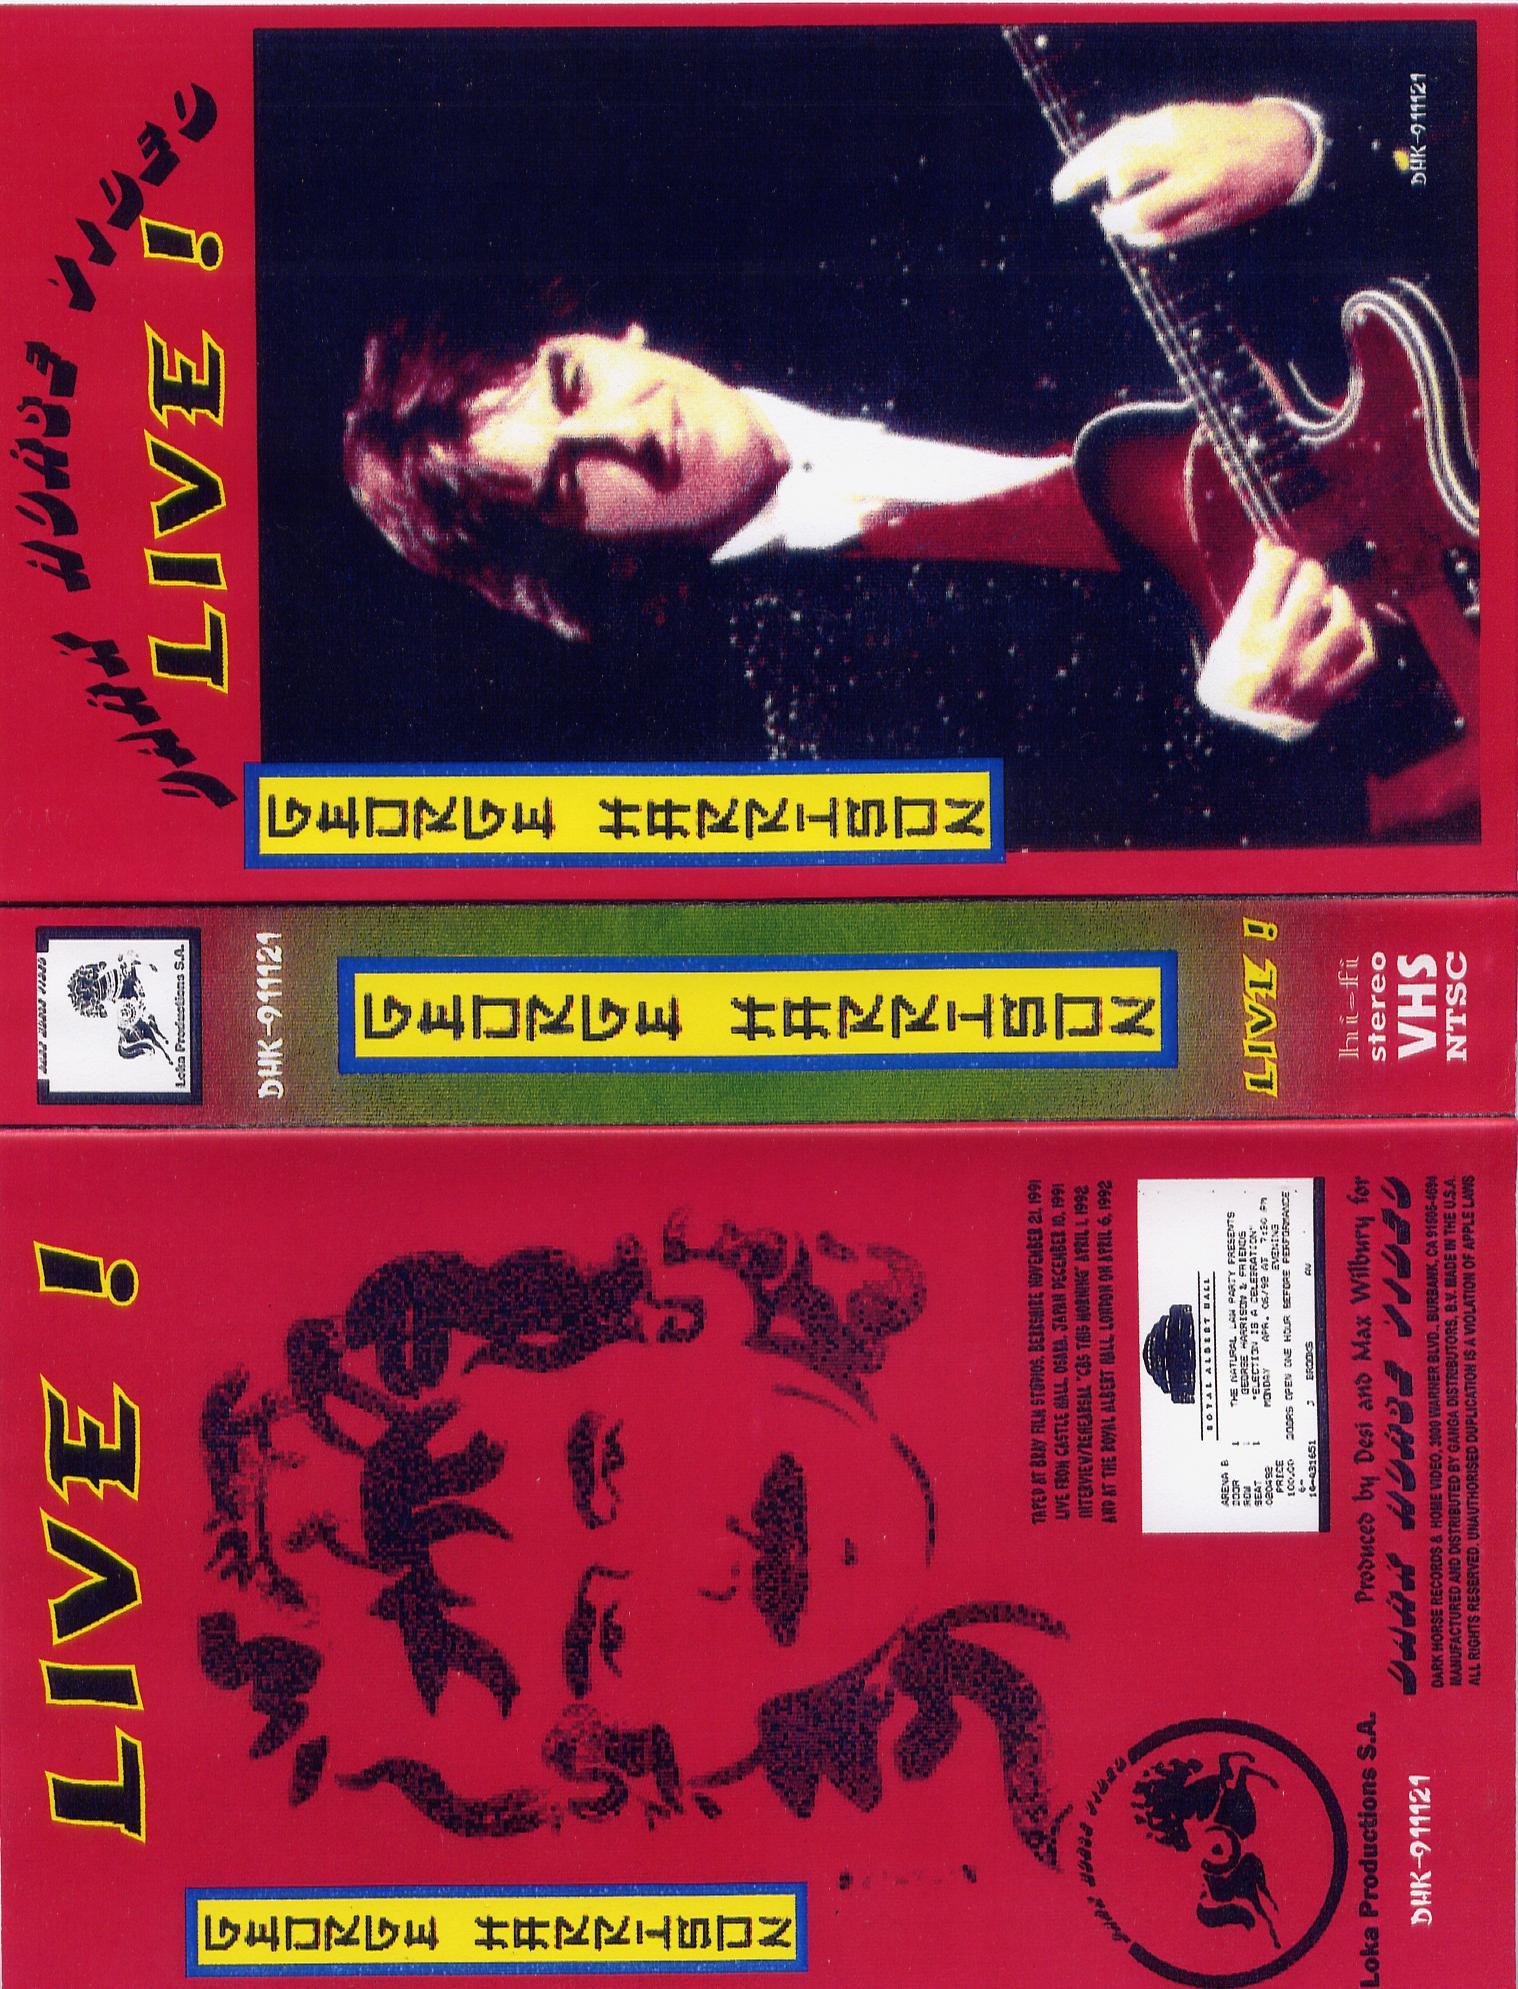 George Harrison and EC in Japan (VHS)